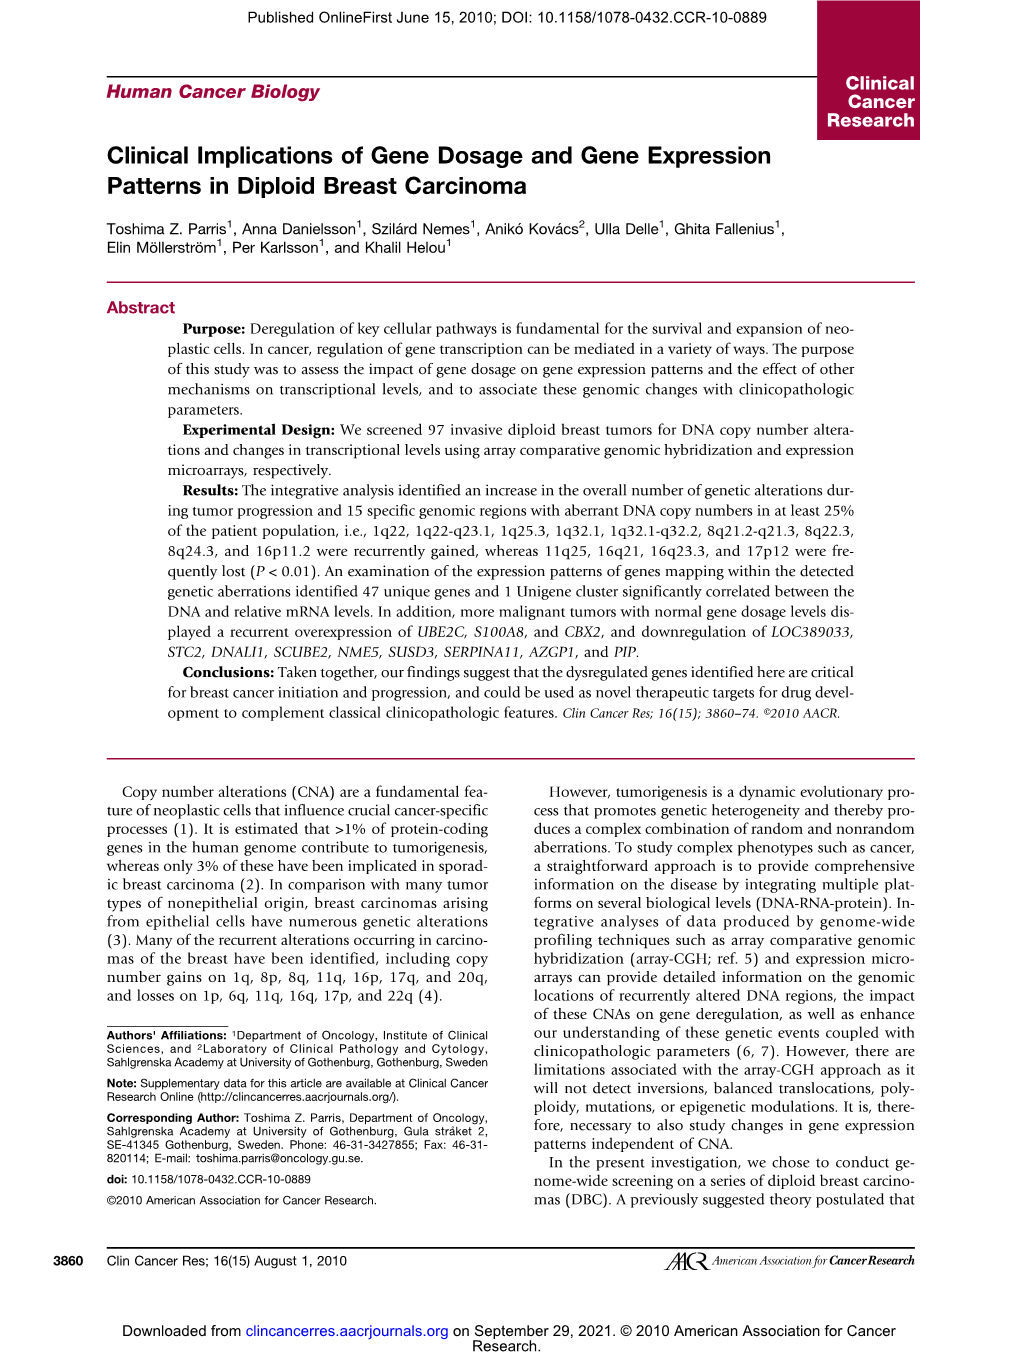 Clinical Implications of Gene Dosage and Gene Expression Patterns in Diploid Breast Carcinoma